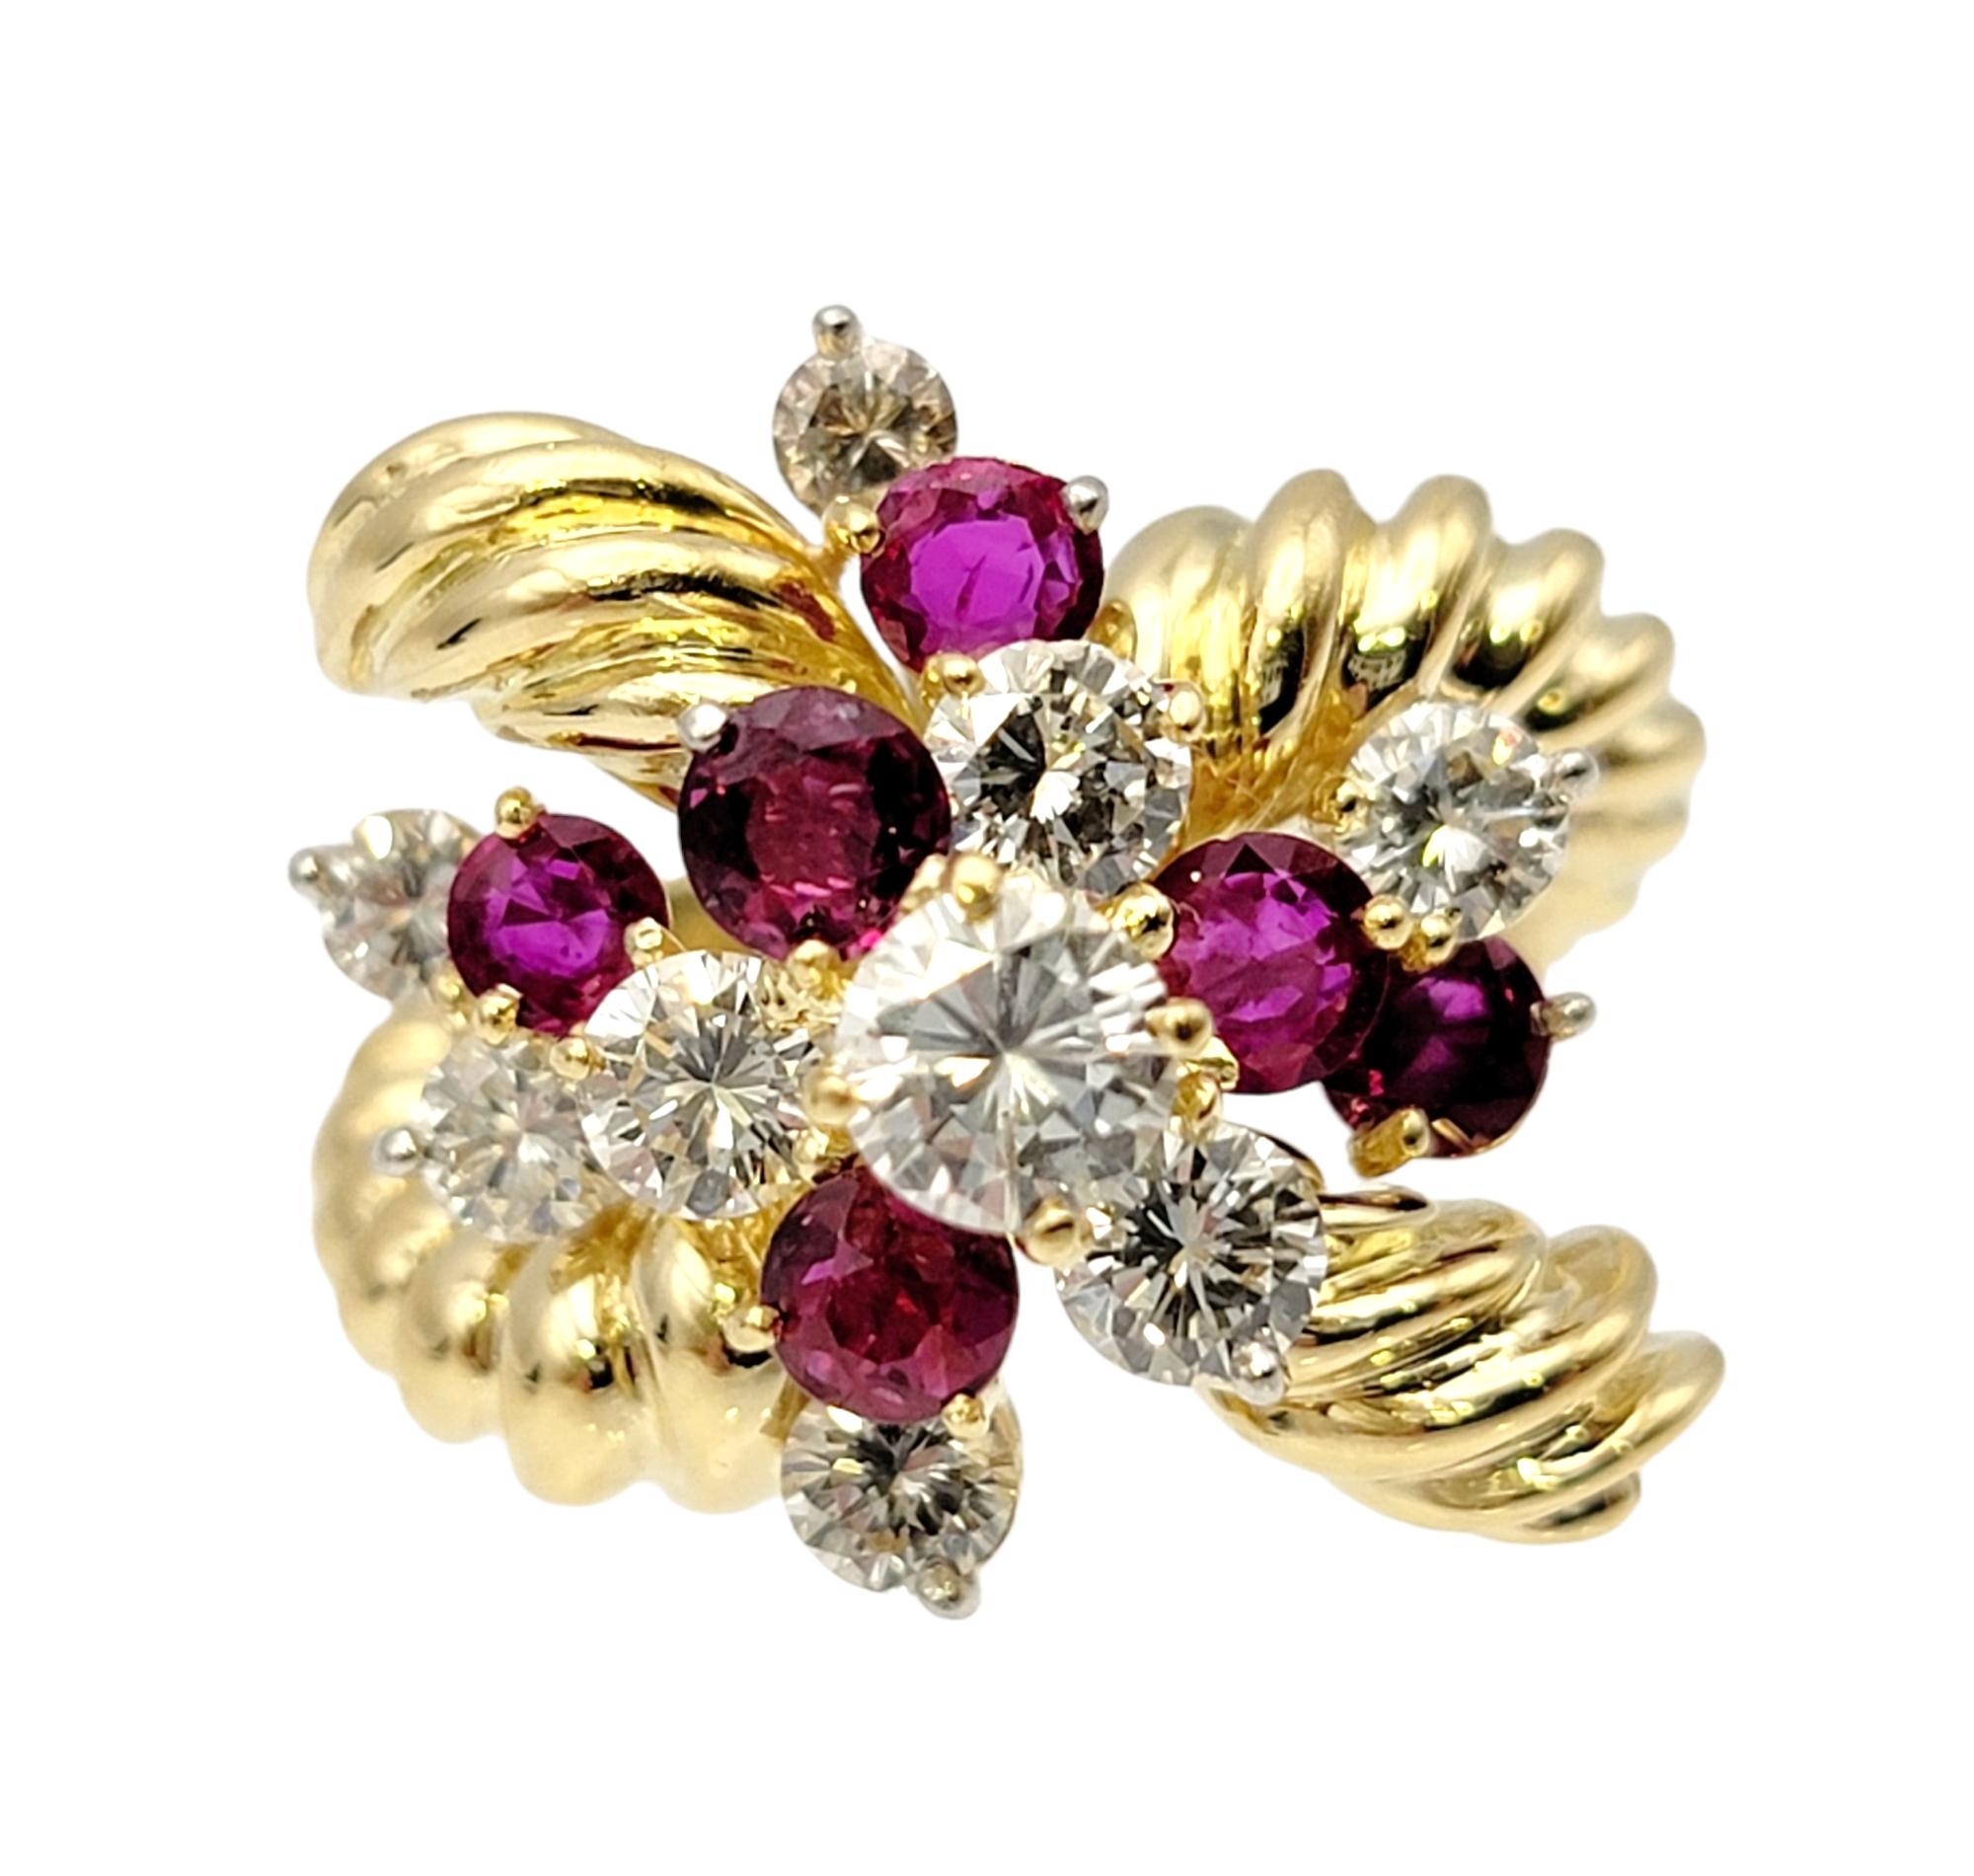 Ring Size: 5.5

This exquisite diamond and ruby ring absolutely bursts with sparkle! The unique design fills the finger with glittery elegance and truly makes a WOW statement. The clustered, tiered layout allows the natural round diamonds and rubies